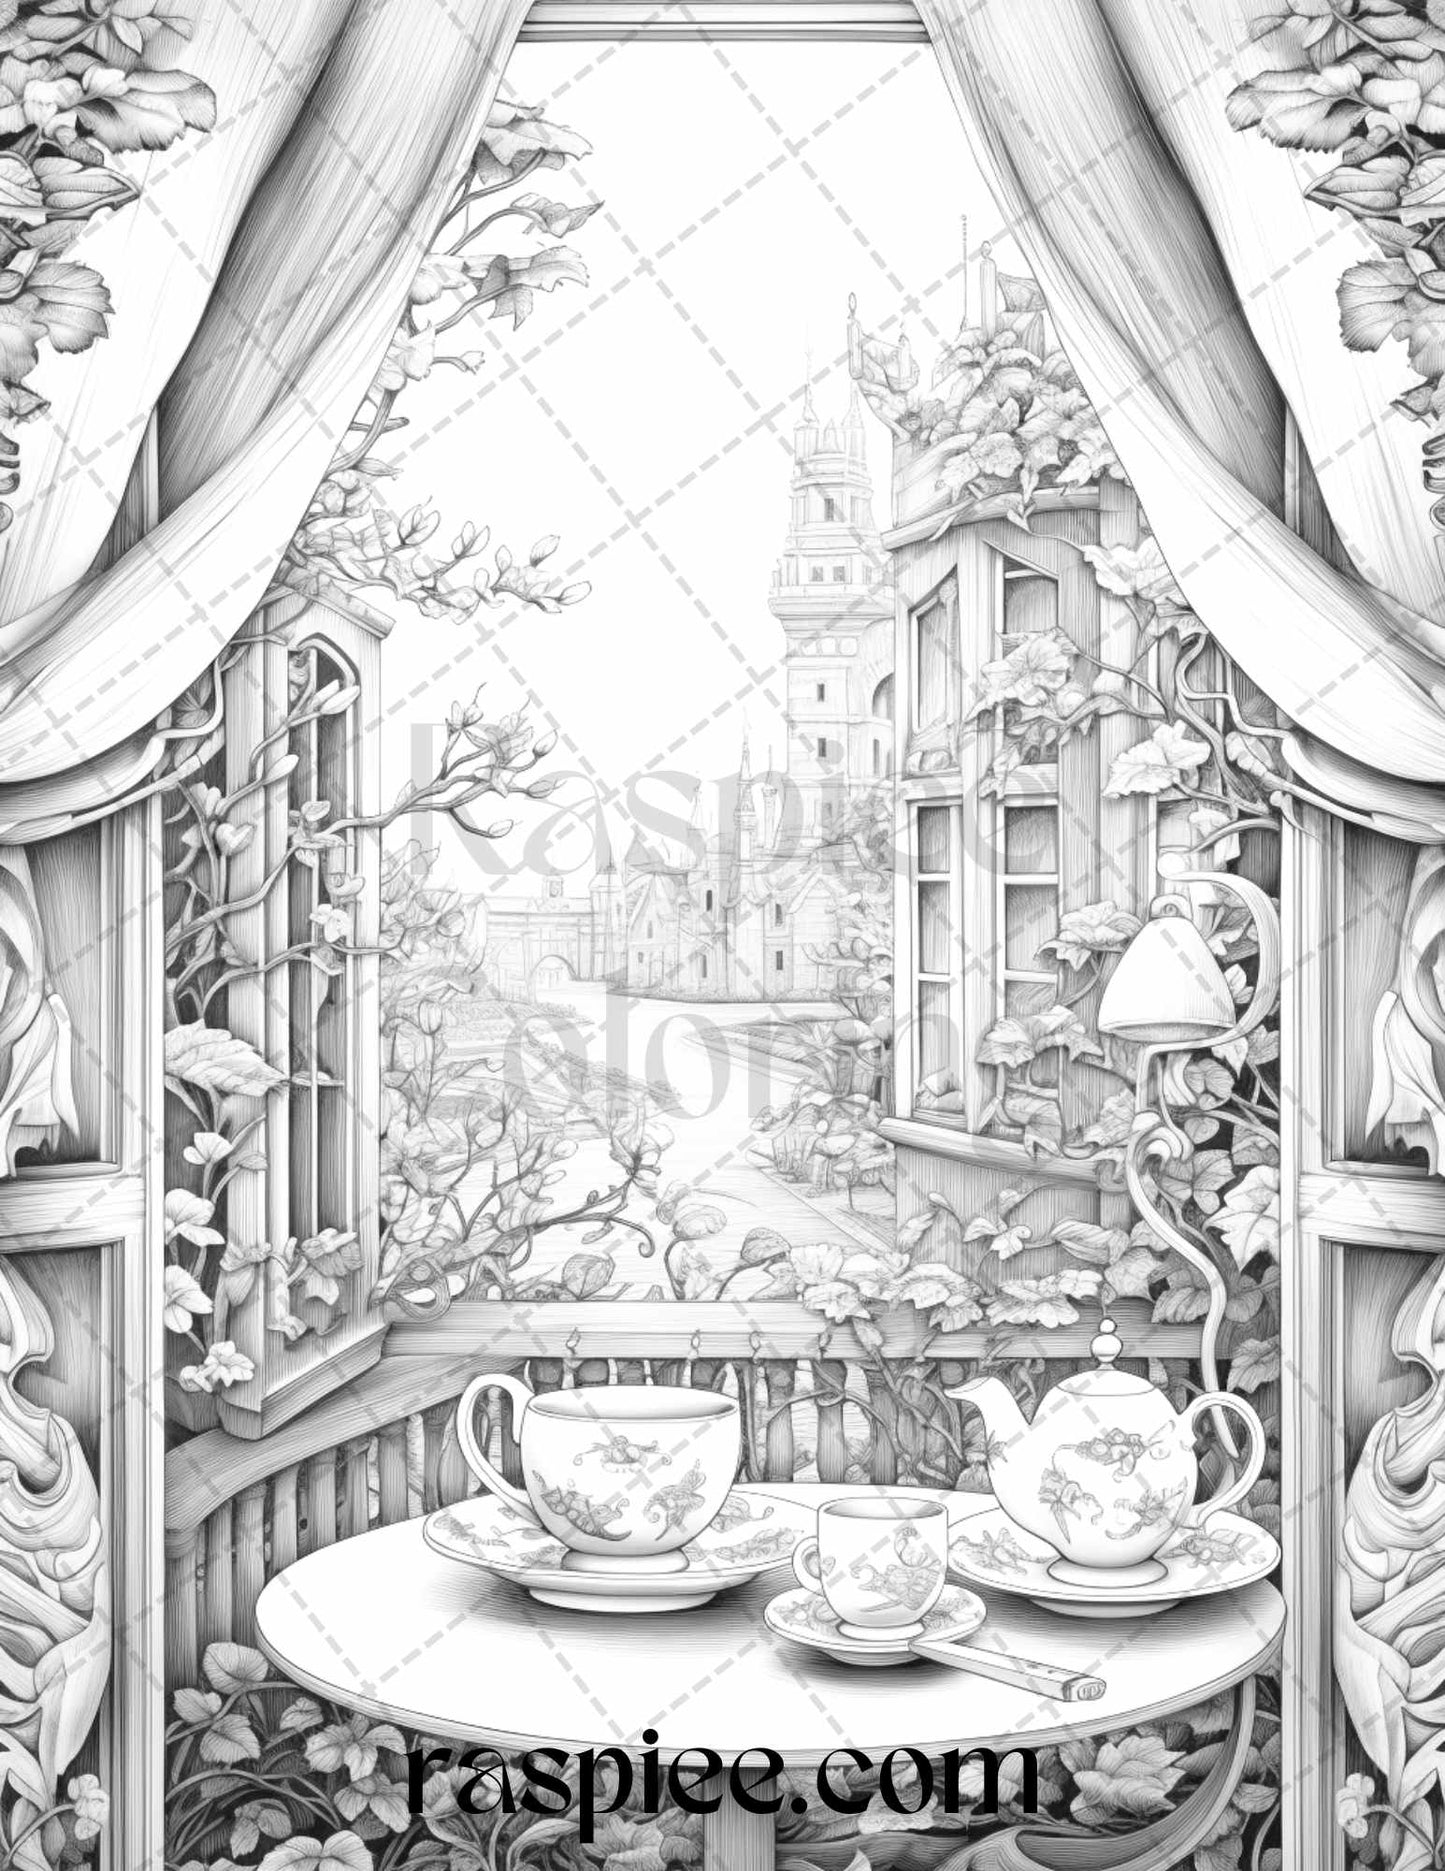 grayscale coloring pages, fantasy coloring pages, adult coloring pages, printable coloring pages, grayscale art, coloring book, fantasy art, magical illustrations, mystical creatures, intricate designs, detailed artwork, stress relief, imaginative landscapes, fairy tale coloring, whimsical drawings, enchanting scenes